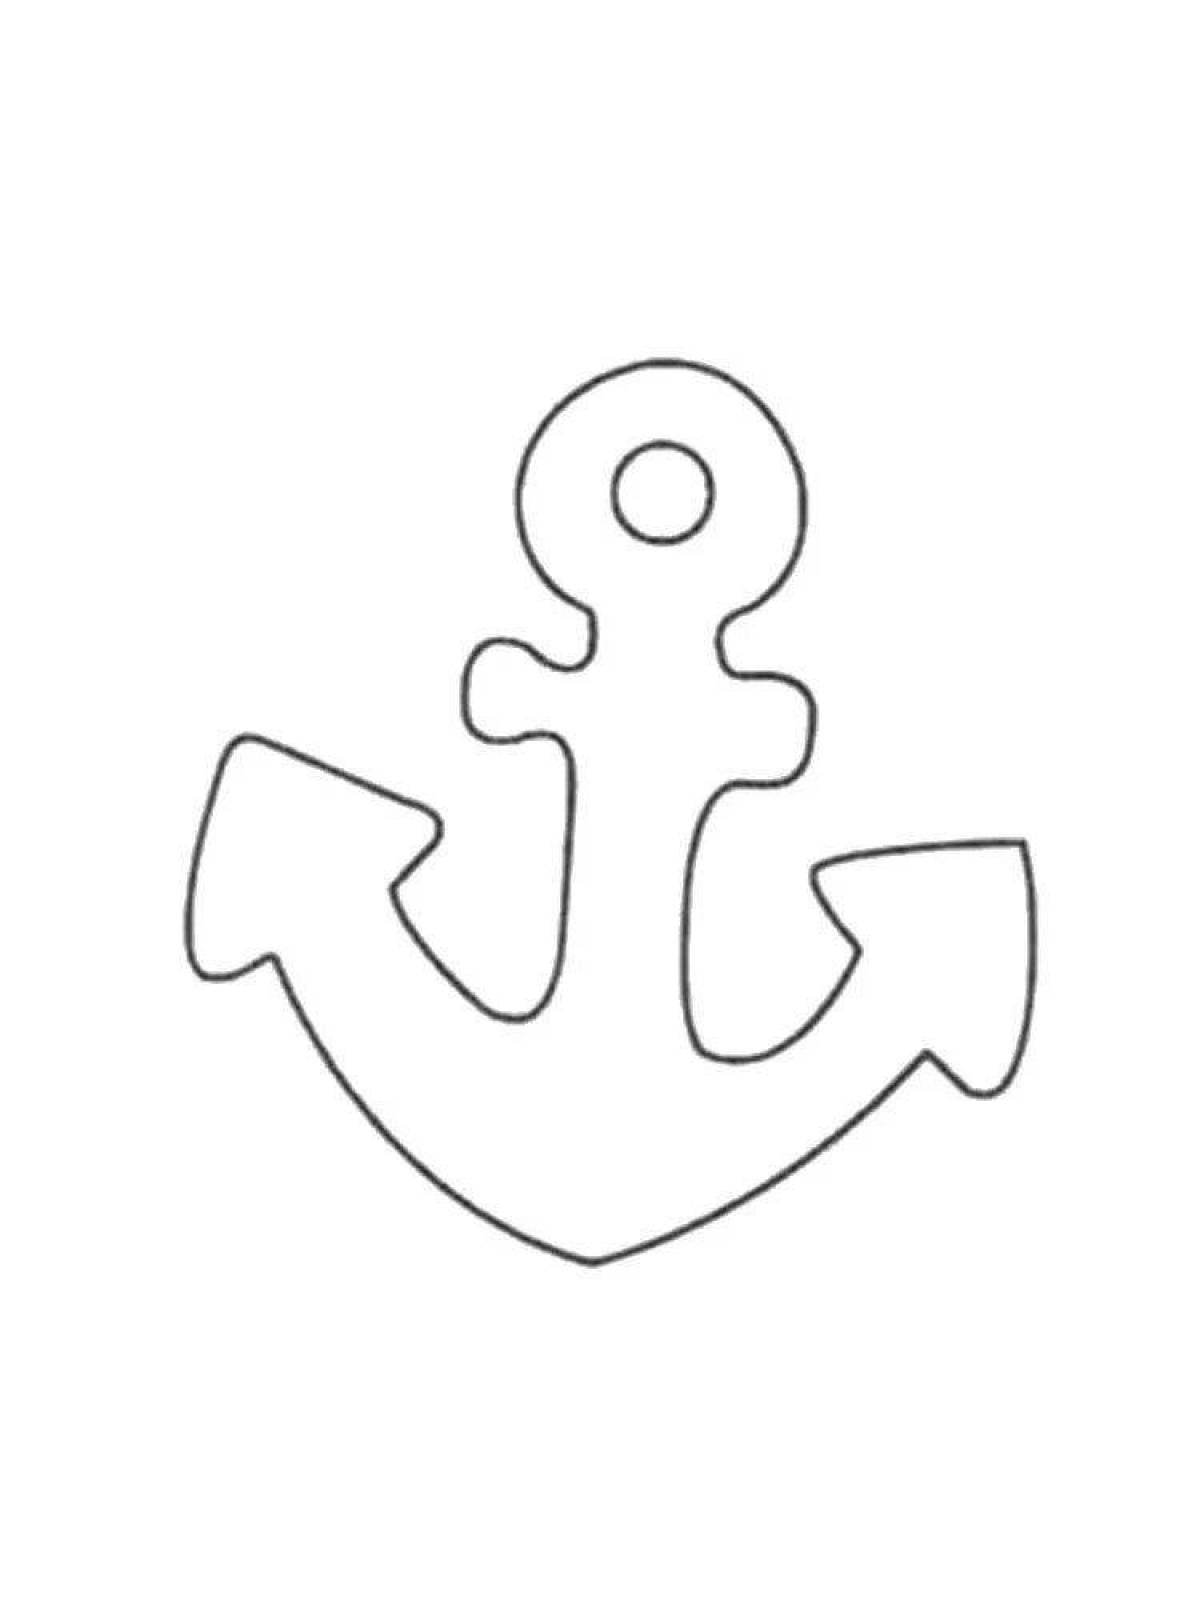 Anchor for kids #13